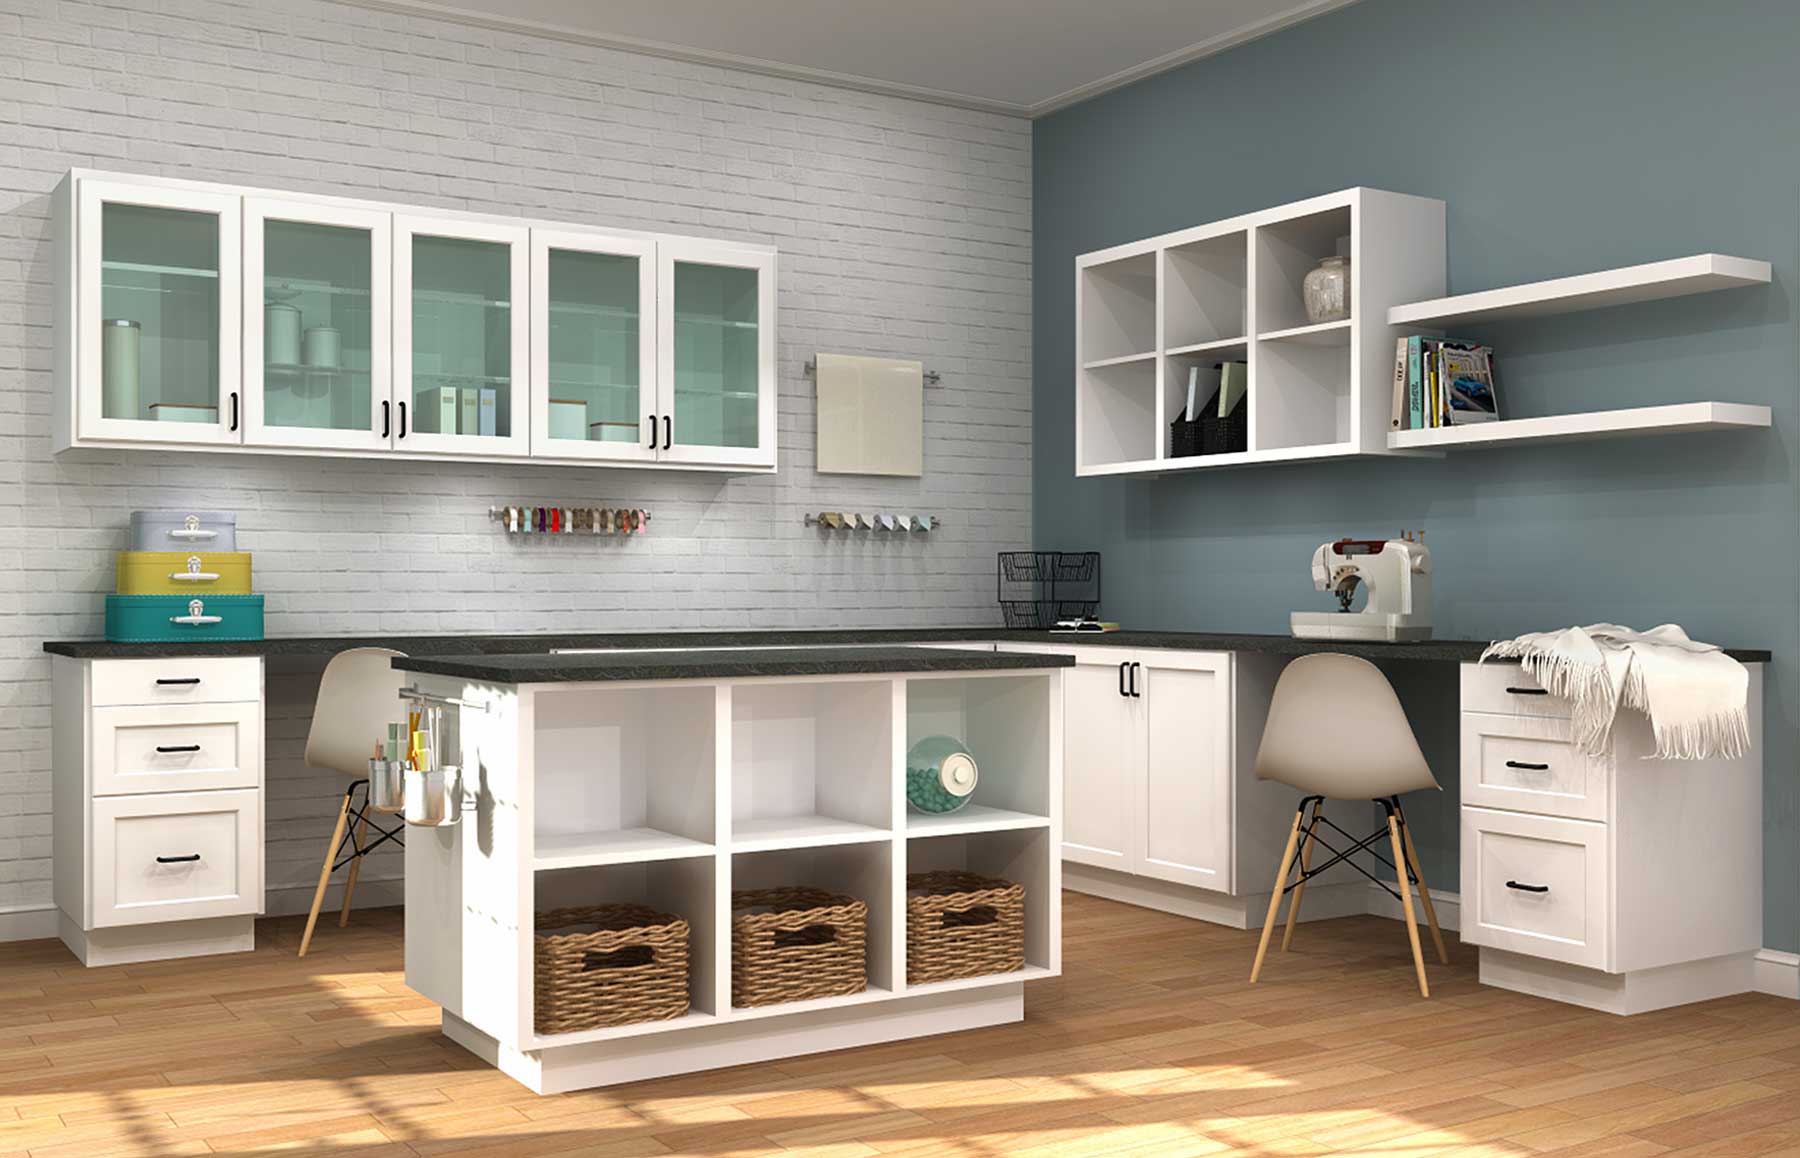 Organize Your Kitchen with Kitchen Craft Cabinetry Storage Solutions